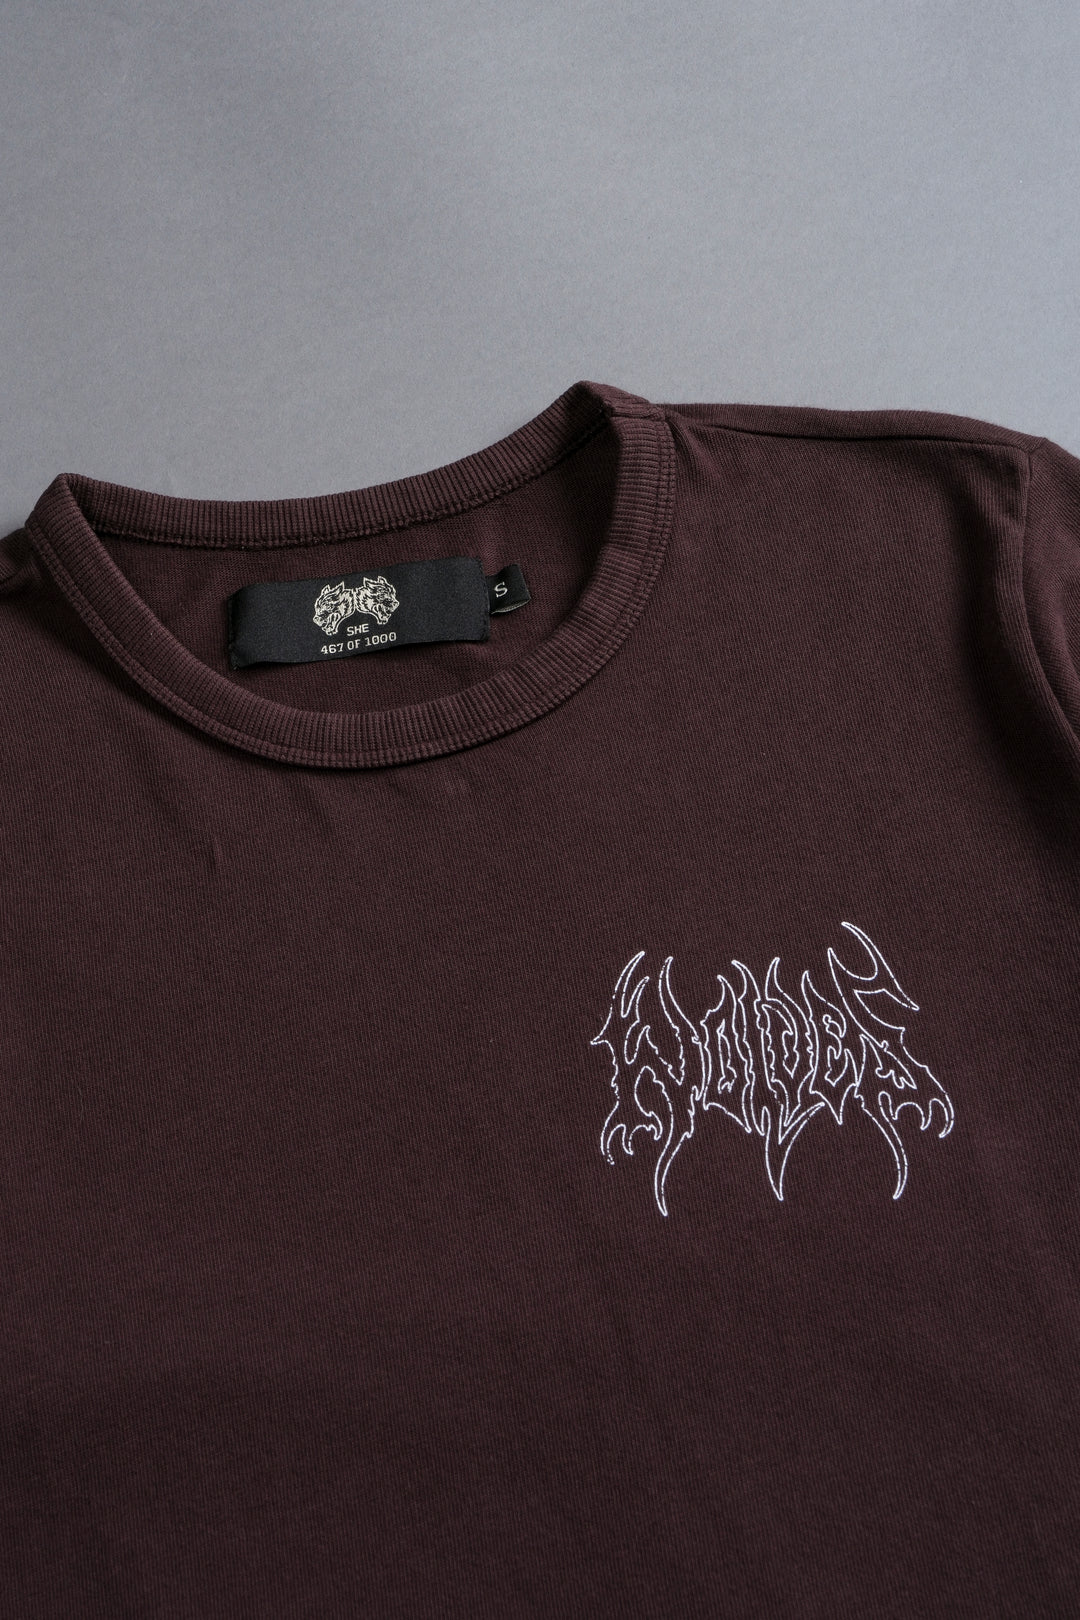 Close To The Heart "Timeless" Tee in Darc Garnet